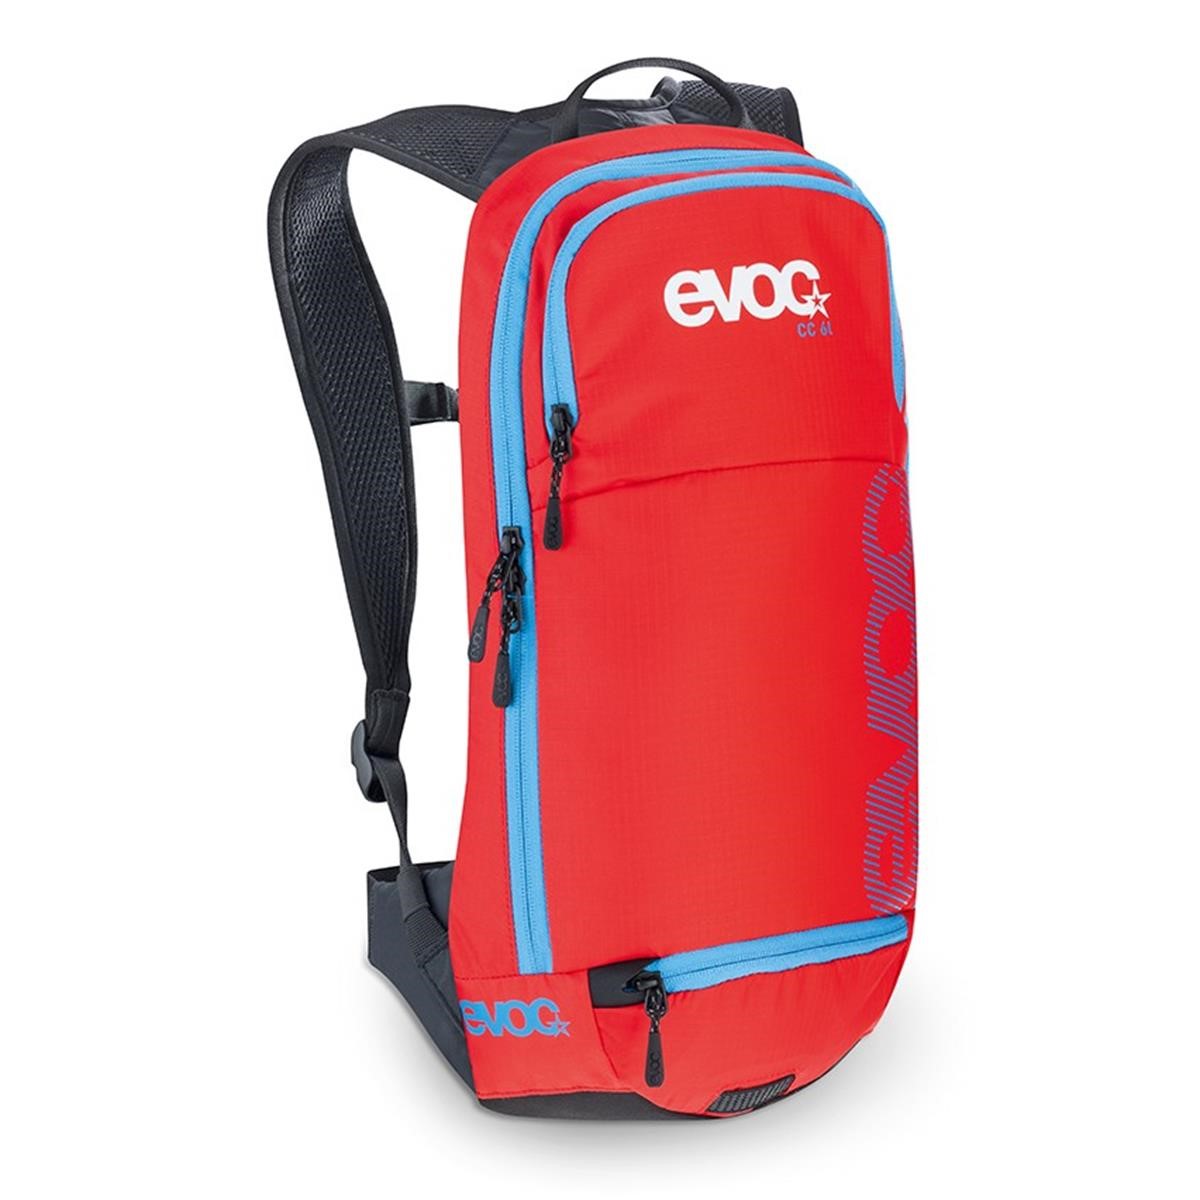 Evoc Backpack with Hydration System Compartment Cross Country Red, 6 Liter